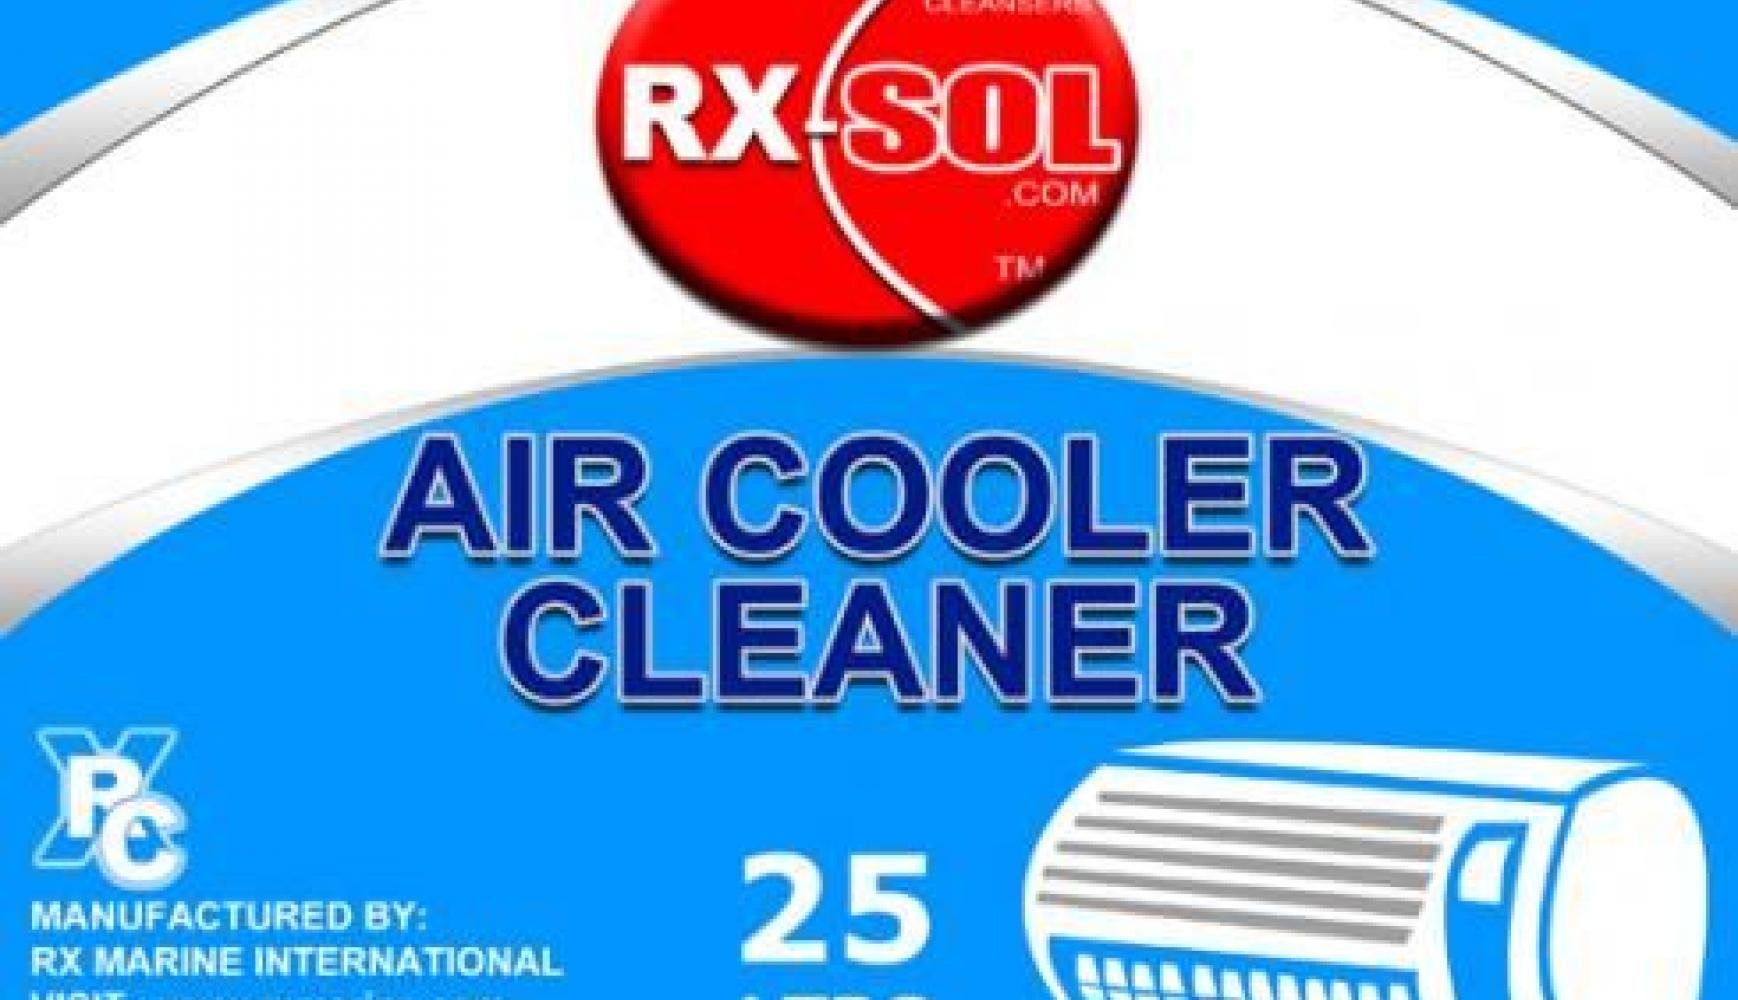 Air cooler cleaner